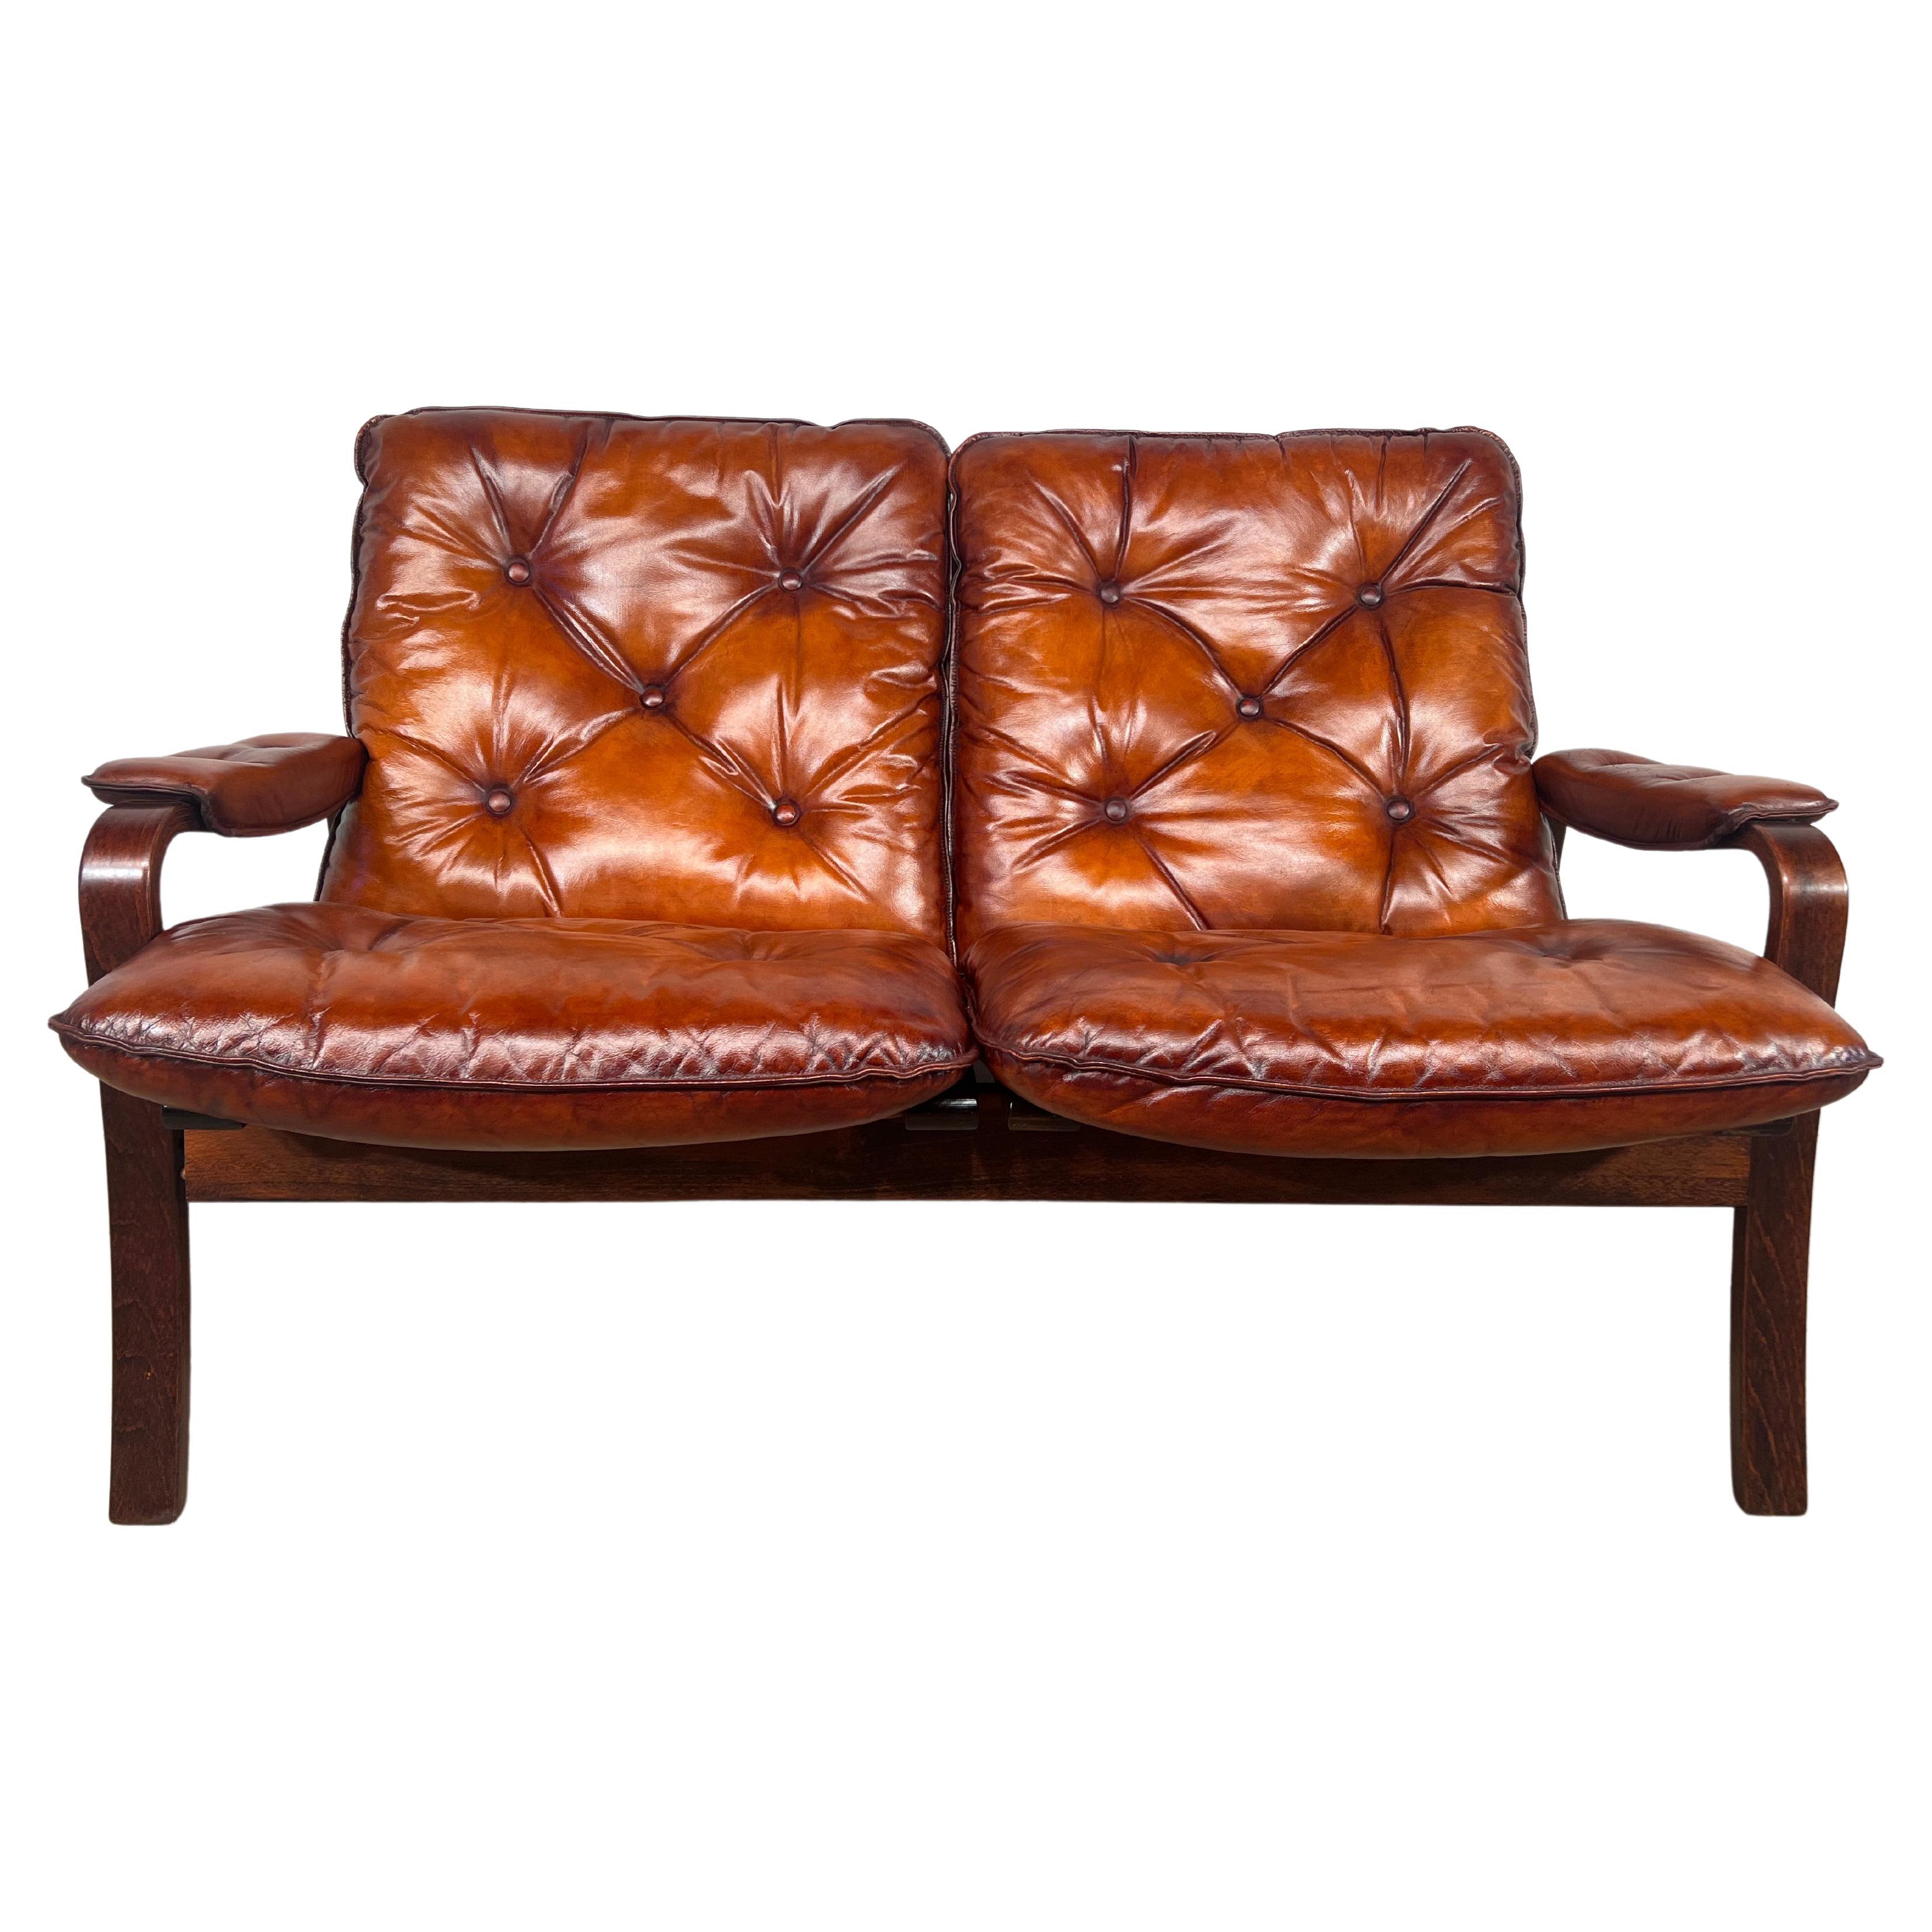 Neat Vintage Danish 1970 Two Seater Bentwood Leather Sofa Hand Dyed Cognac #548 For Sale